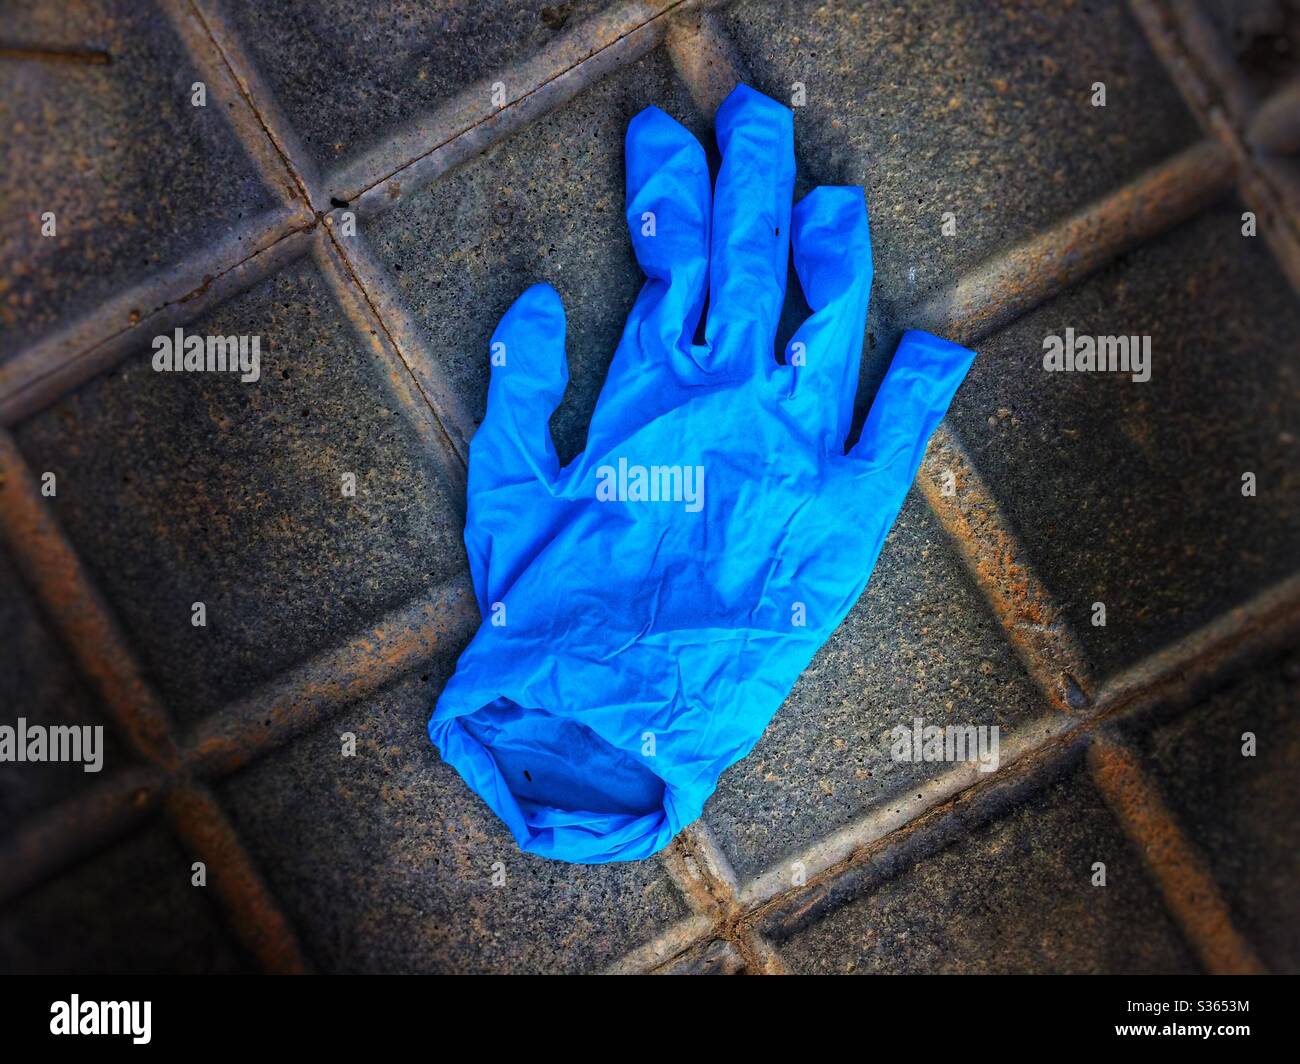 Abandoned blue protective latex glove avandoned on the street Stock Photo